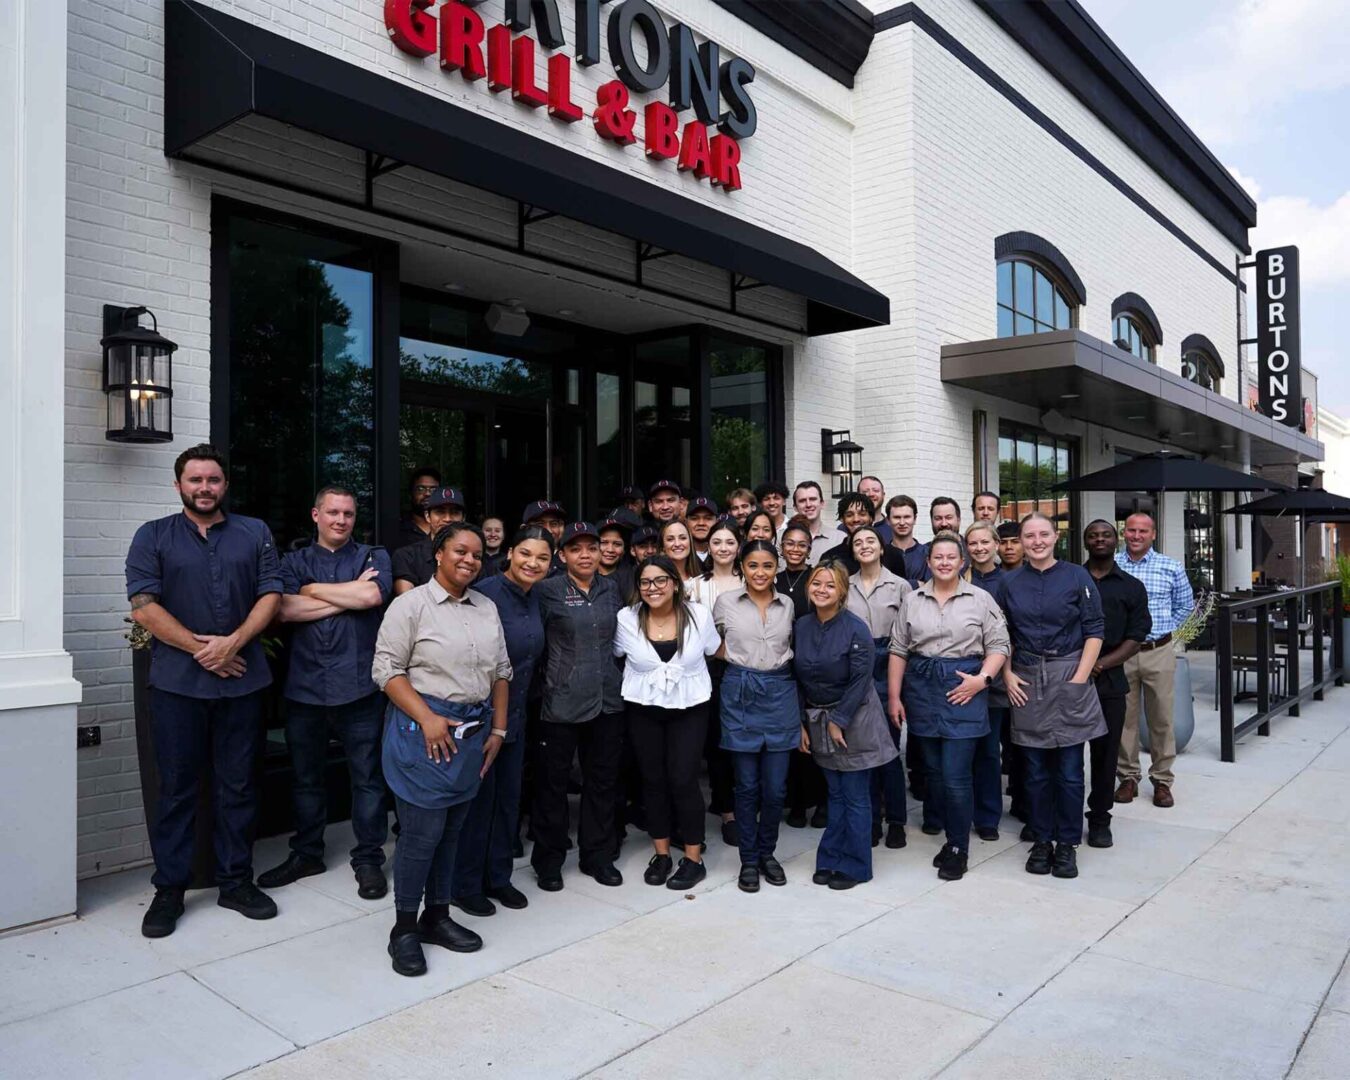 Group photo of the staff in front of Burtons Bar & Grill